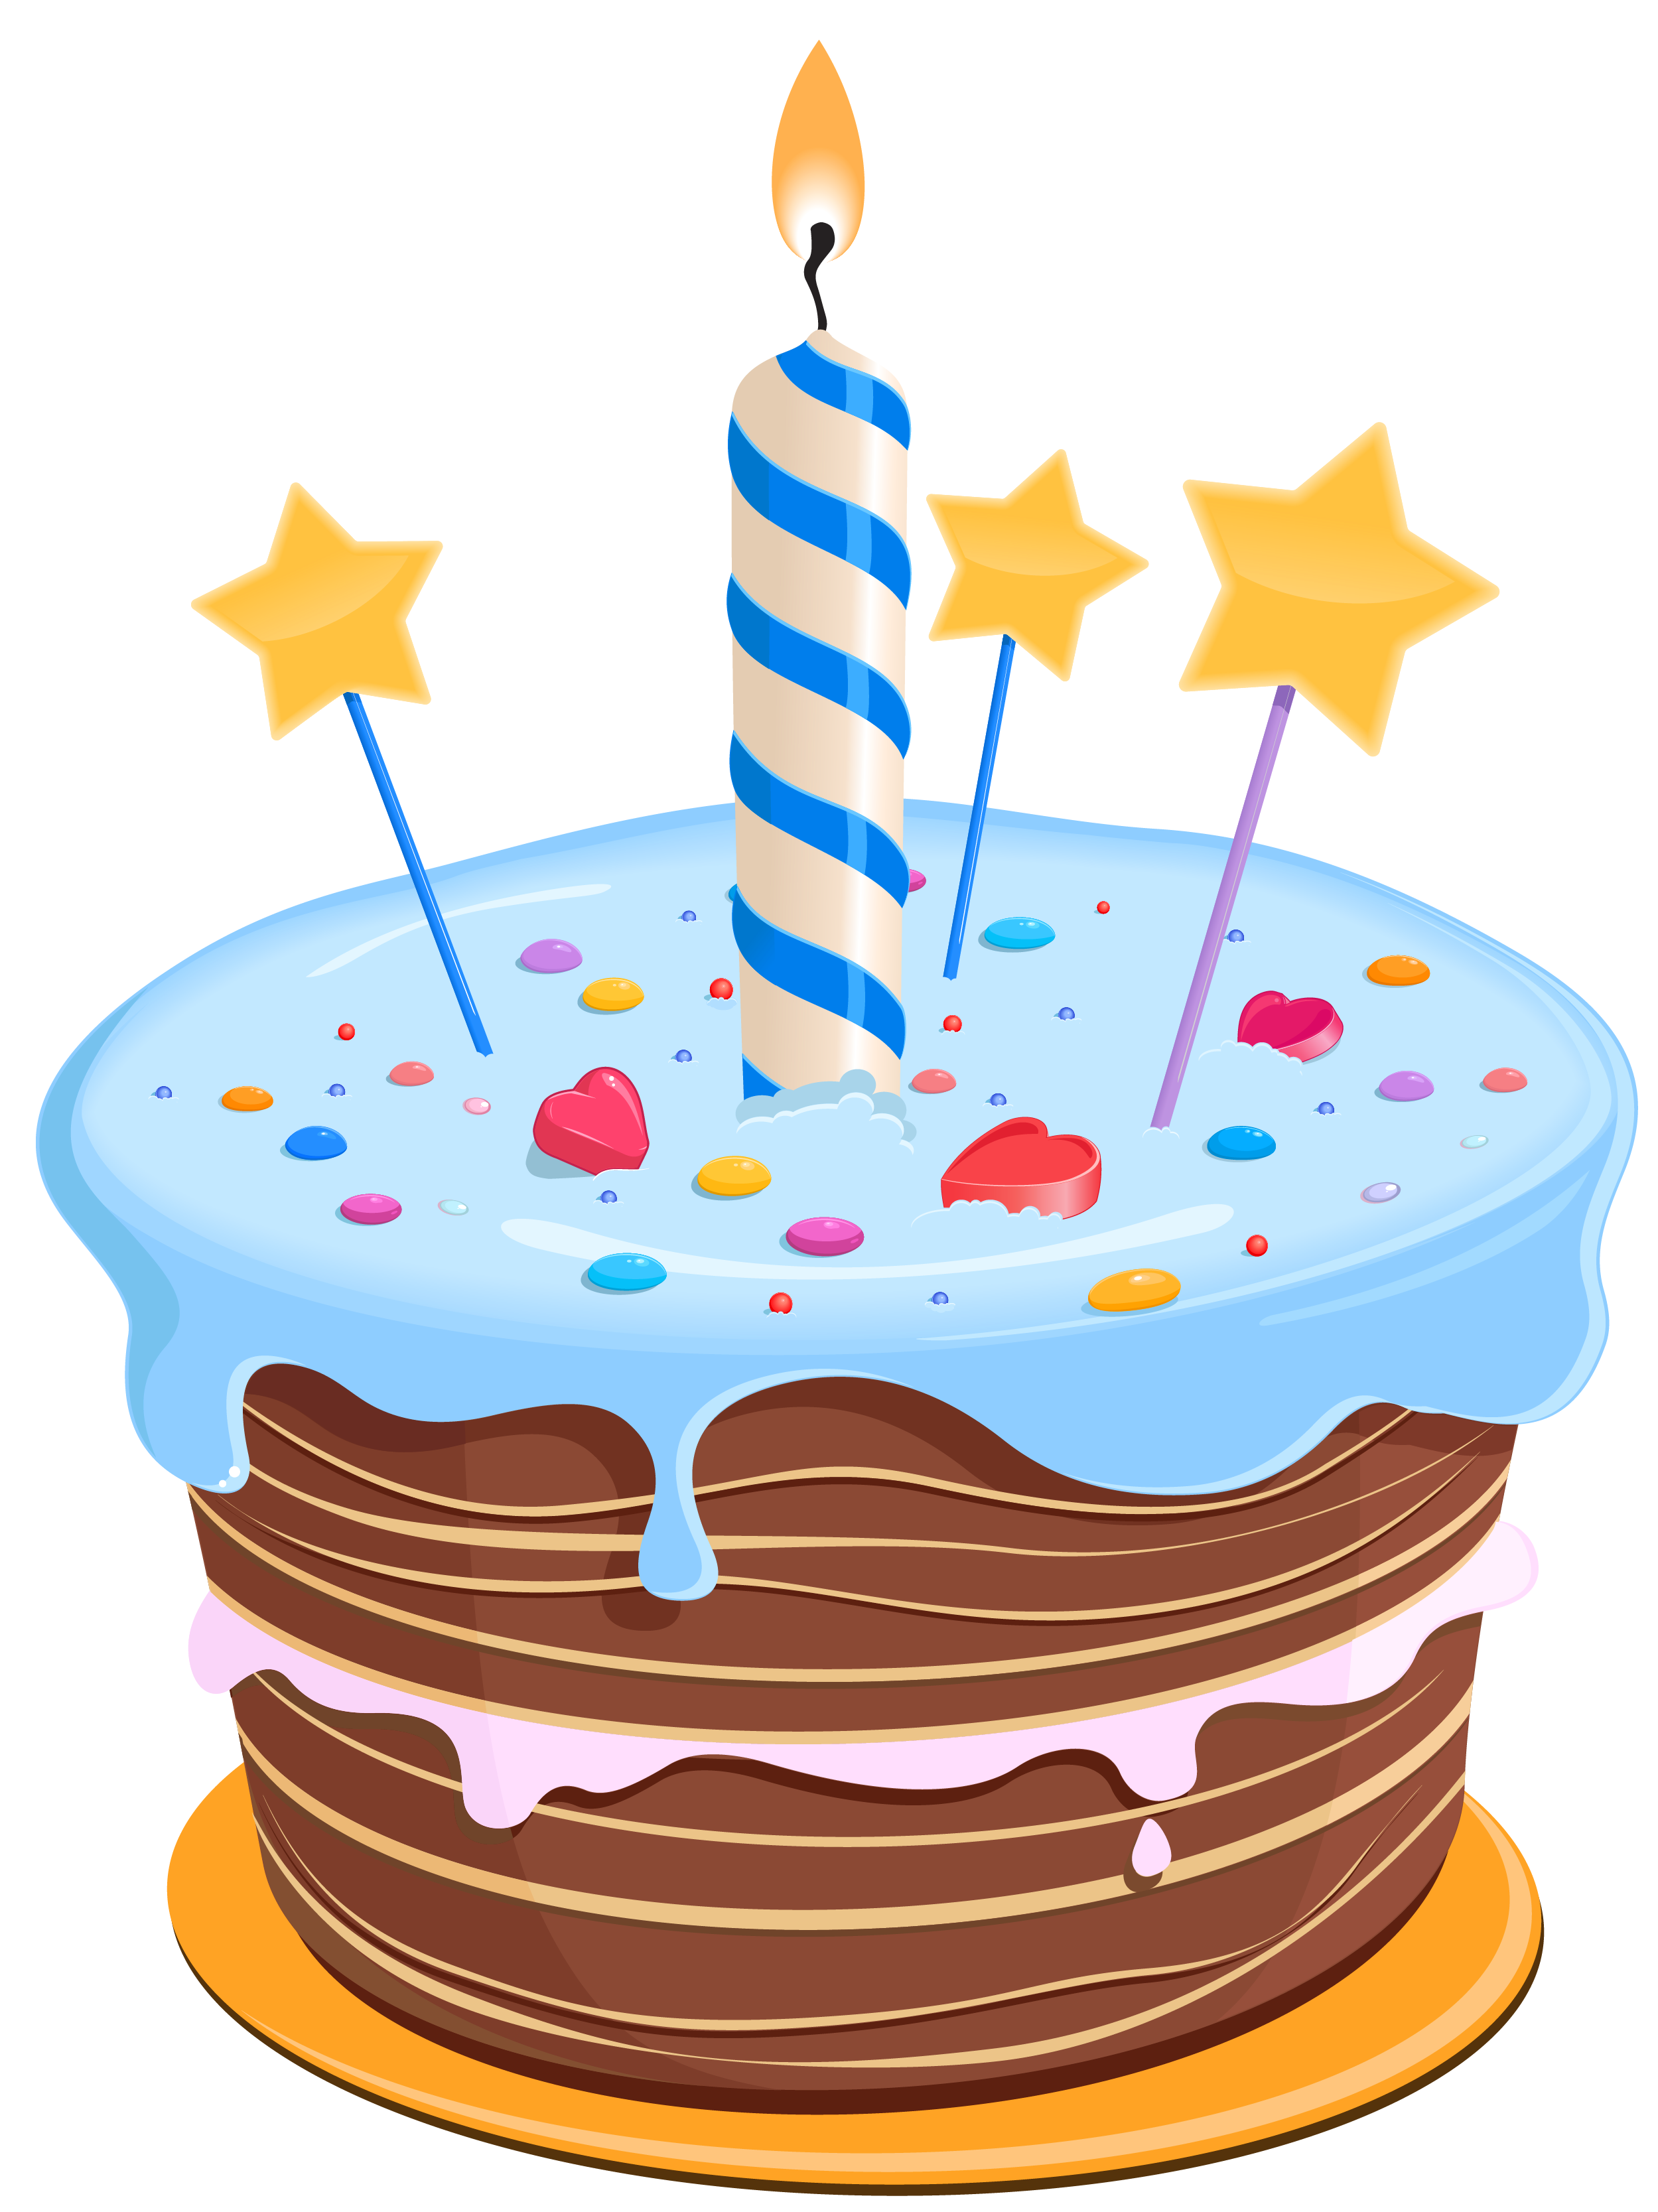 PNG HD Of A Birthday Cake - 128394